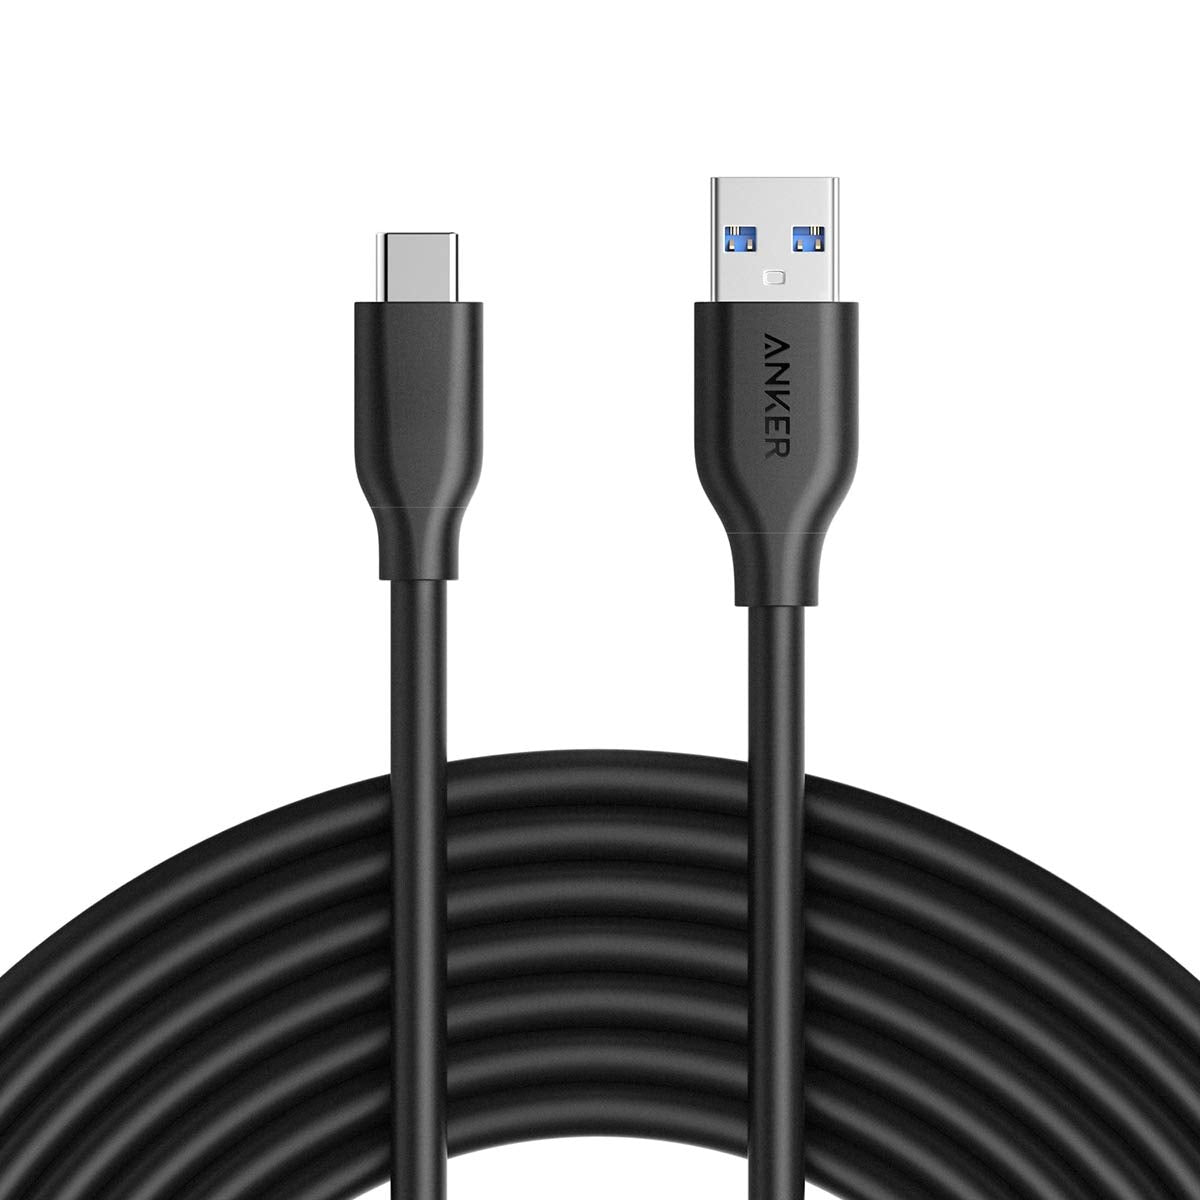 Anker USB C Cable, Powerline USB 3.0 to USB C Charger Cable (10ft)